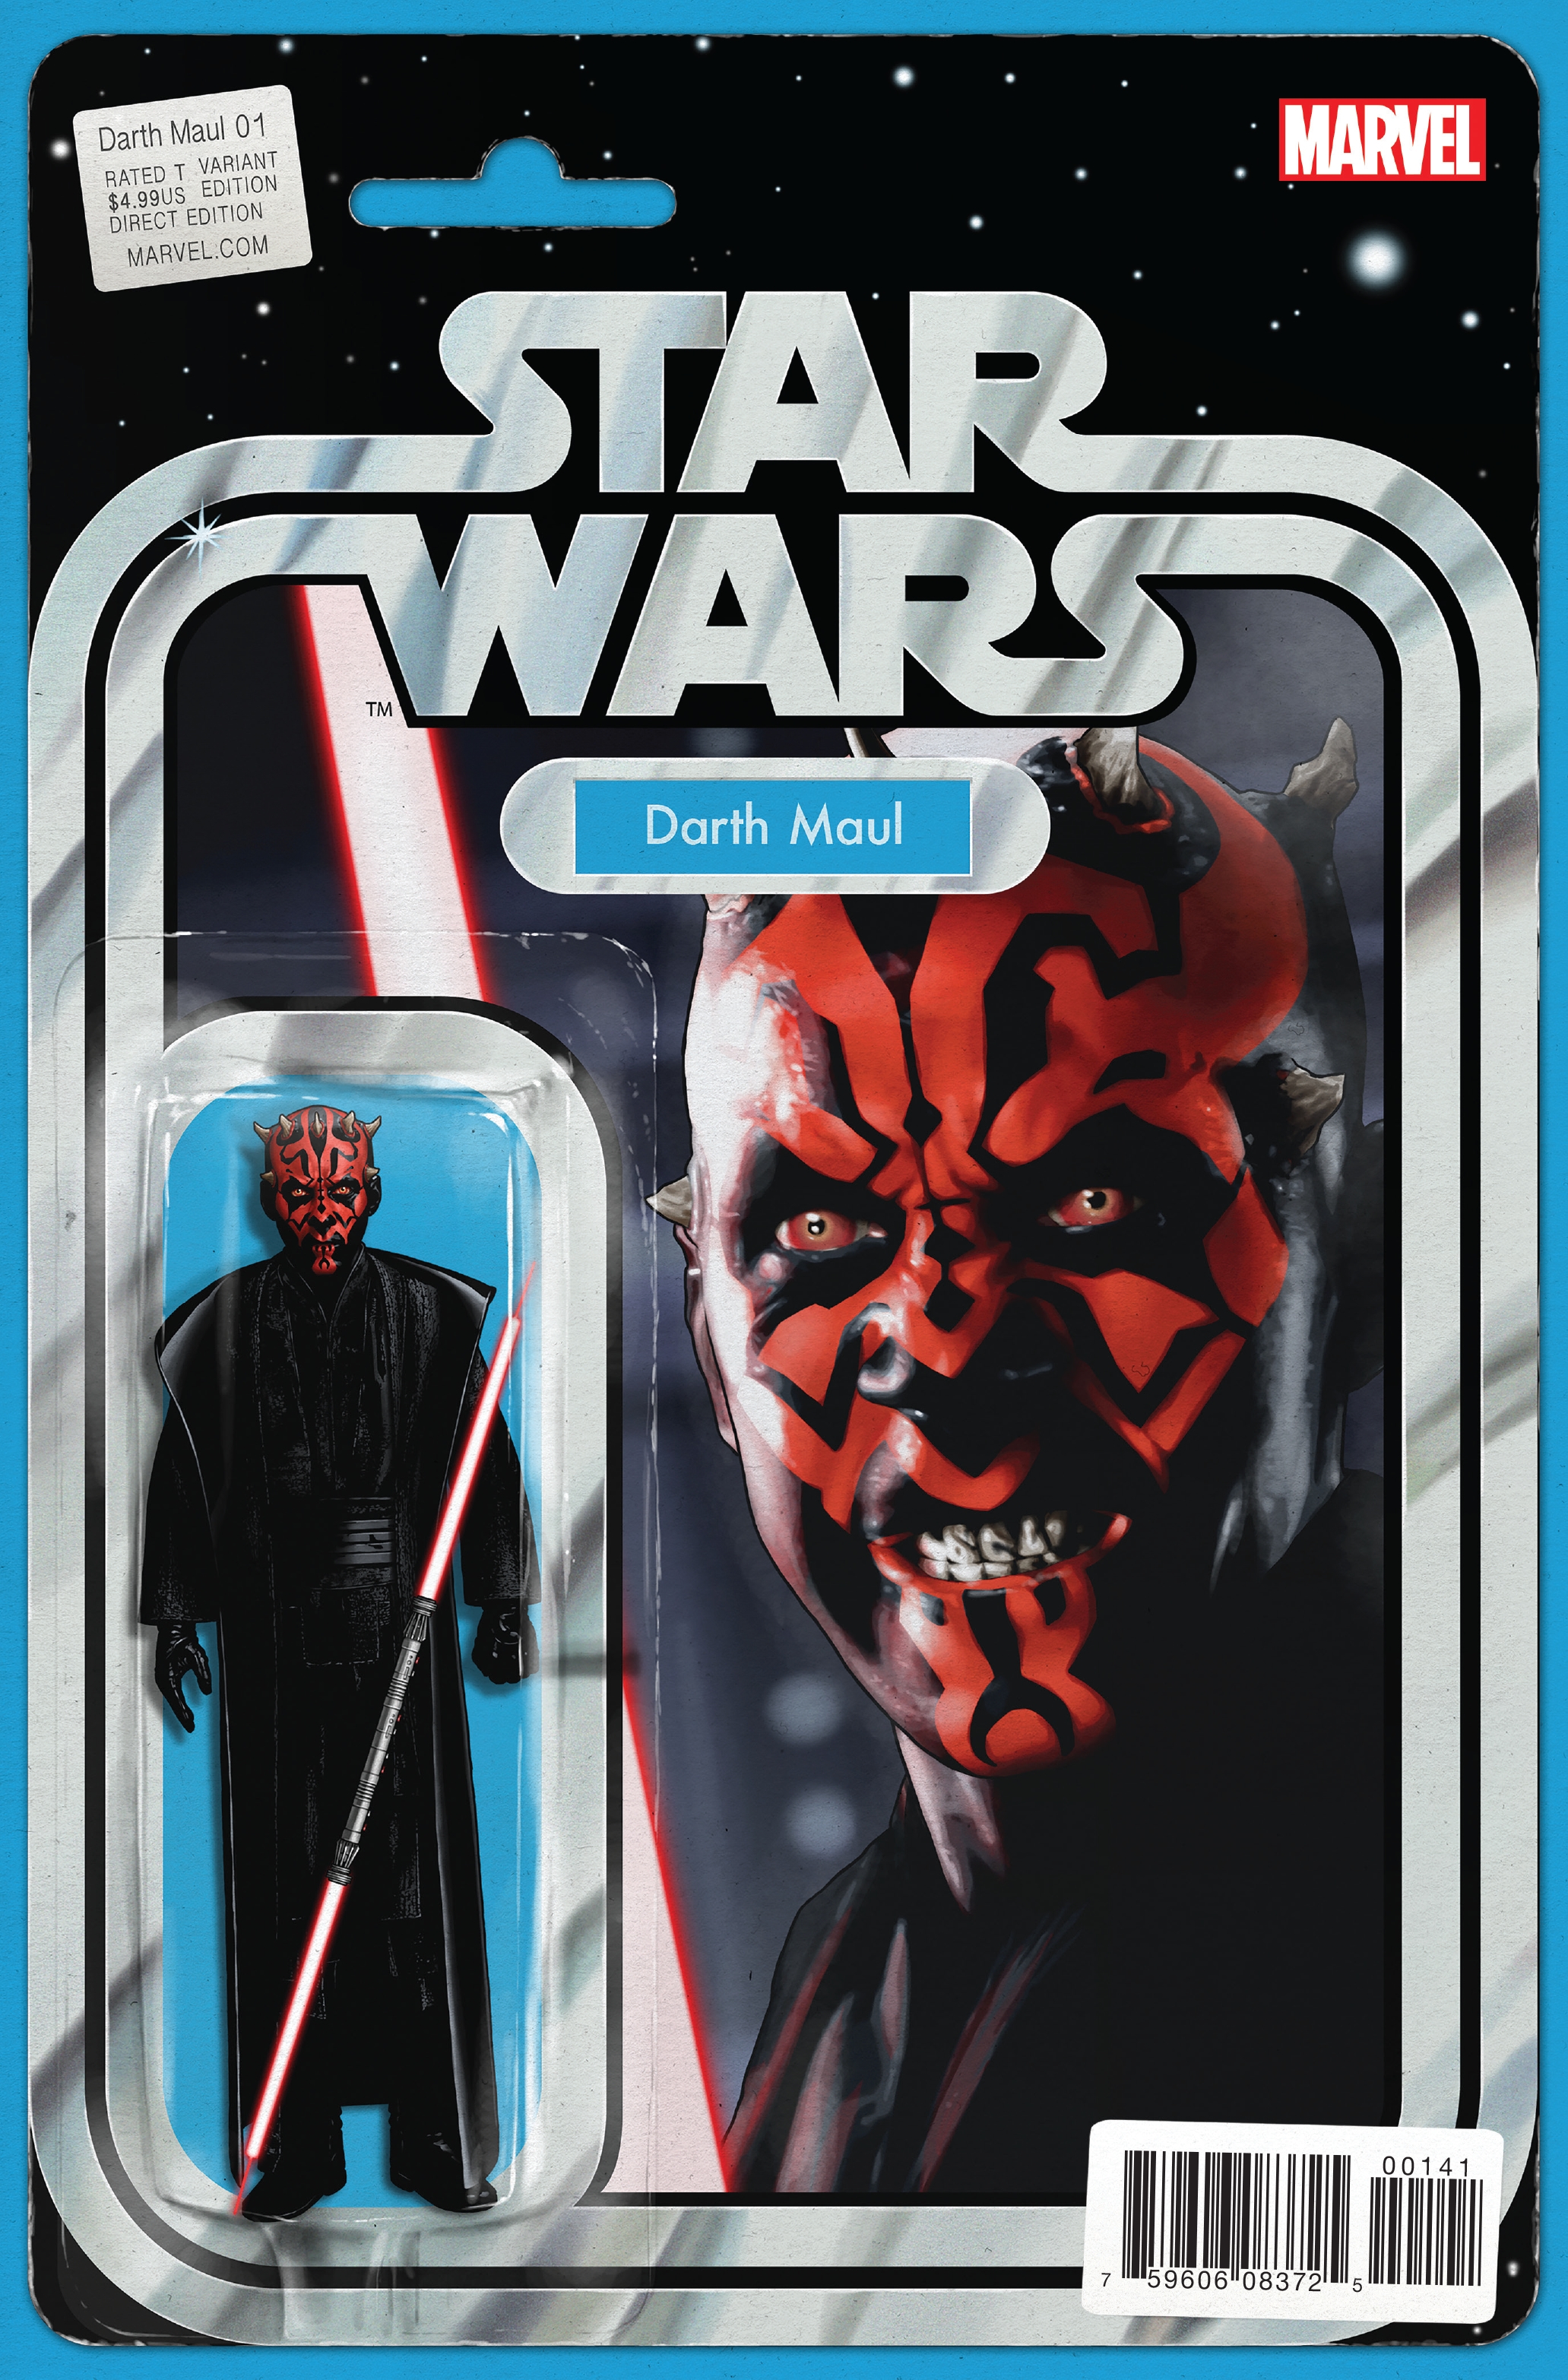 Darth Maul #1 (Action Figure Variant Cover) (01.02.2017)